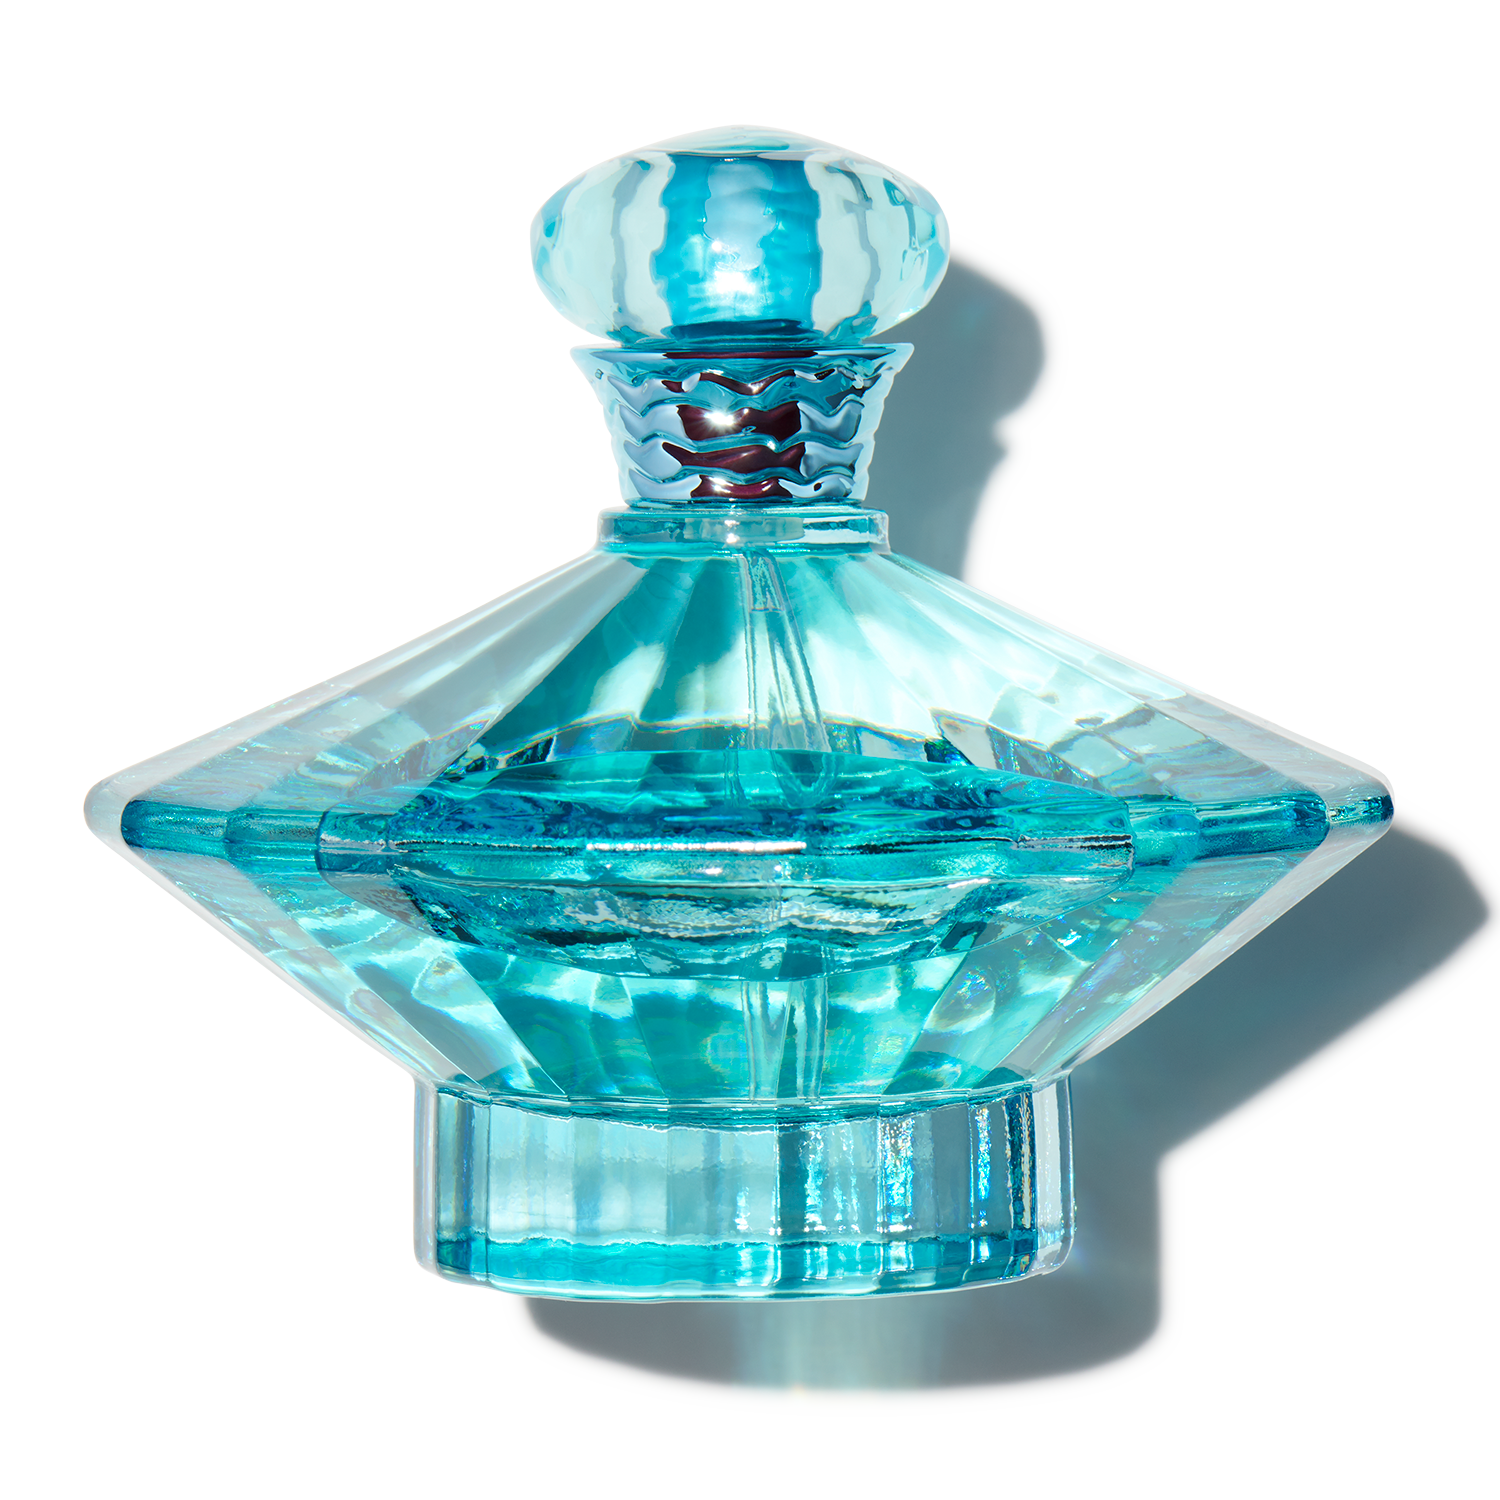 https://perfumedazzle.com/wp-content/uploads/2022/09/Curious-by-Britney-Spears-100ml-EDP-Spray-Women-2.webp